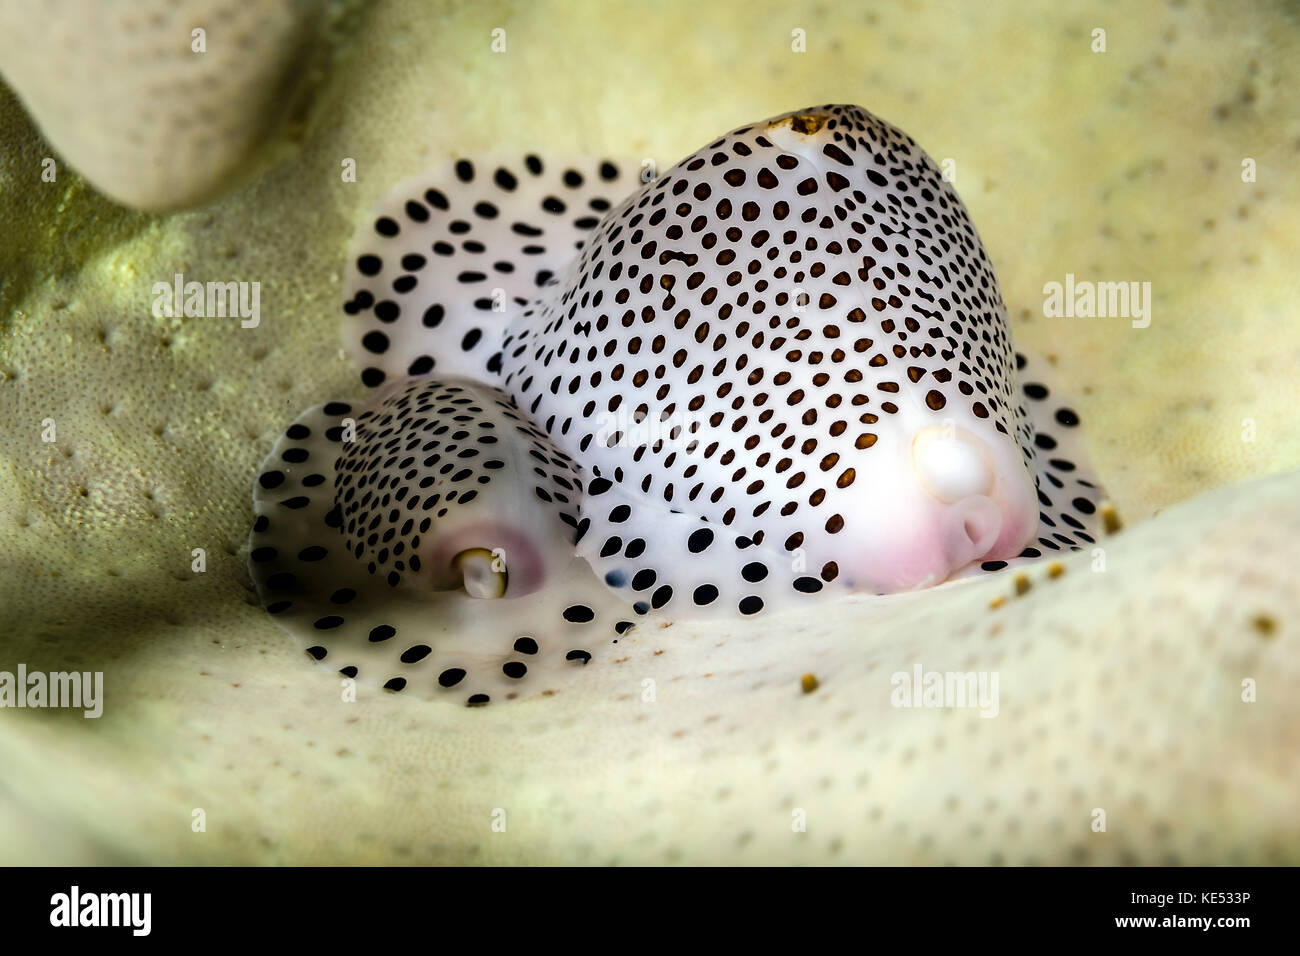 Black-spotted egg cowrie, Bohol Sea, Philippines. Stock Photo